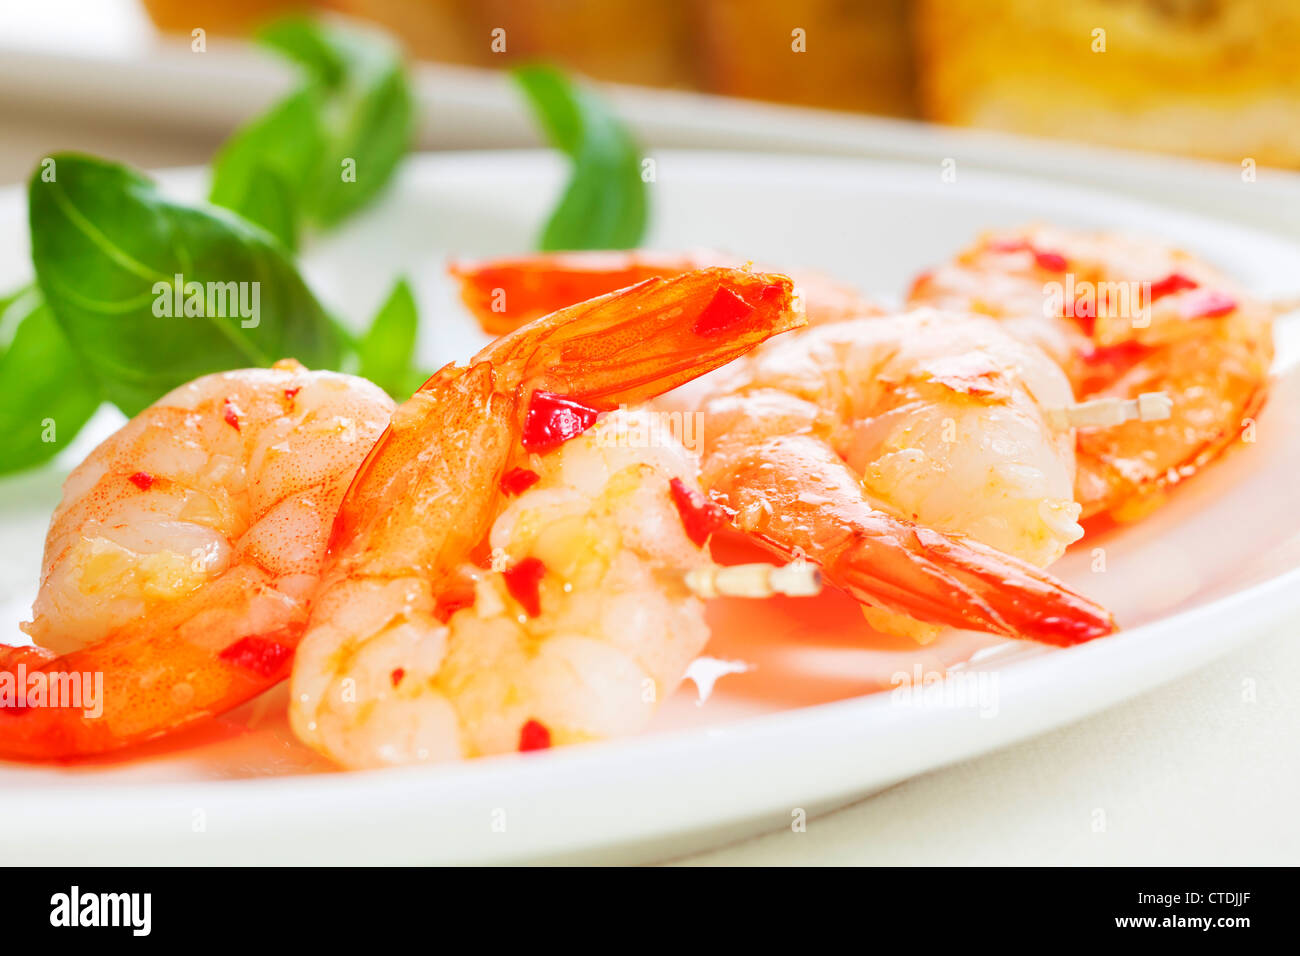 Prawns on skewers in garlic and chilli, with garlic bread. Stock Photo